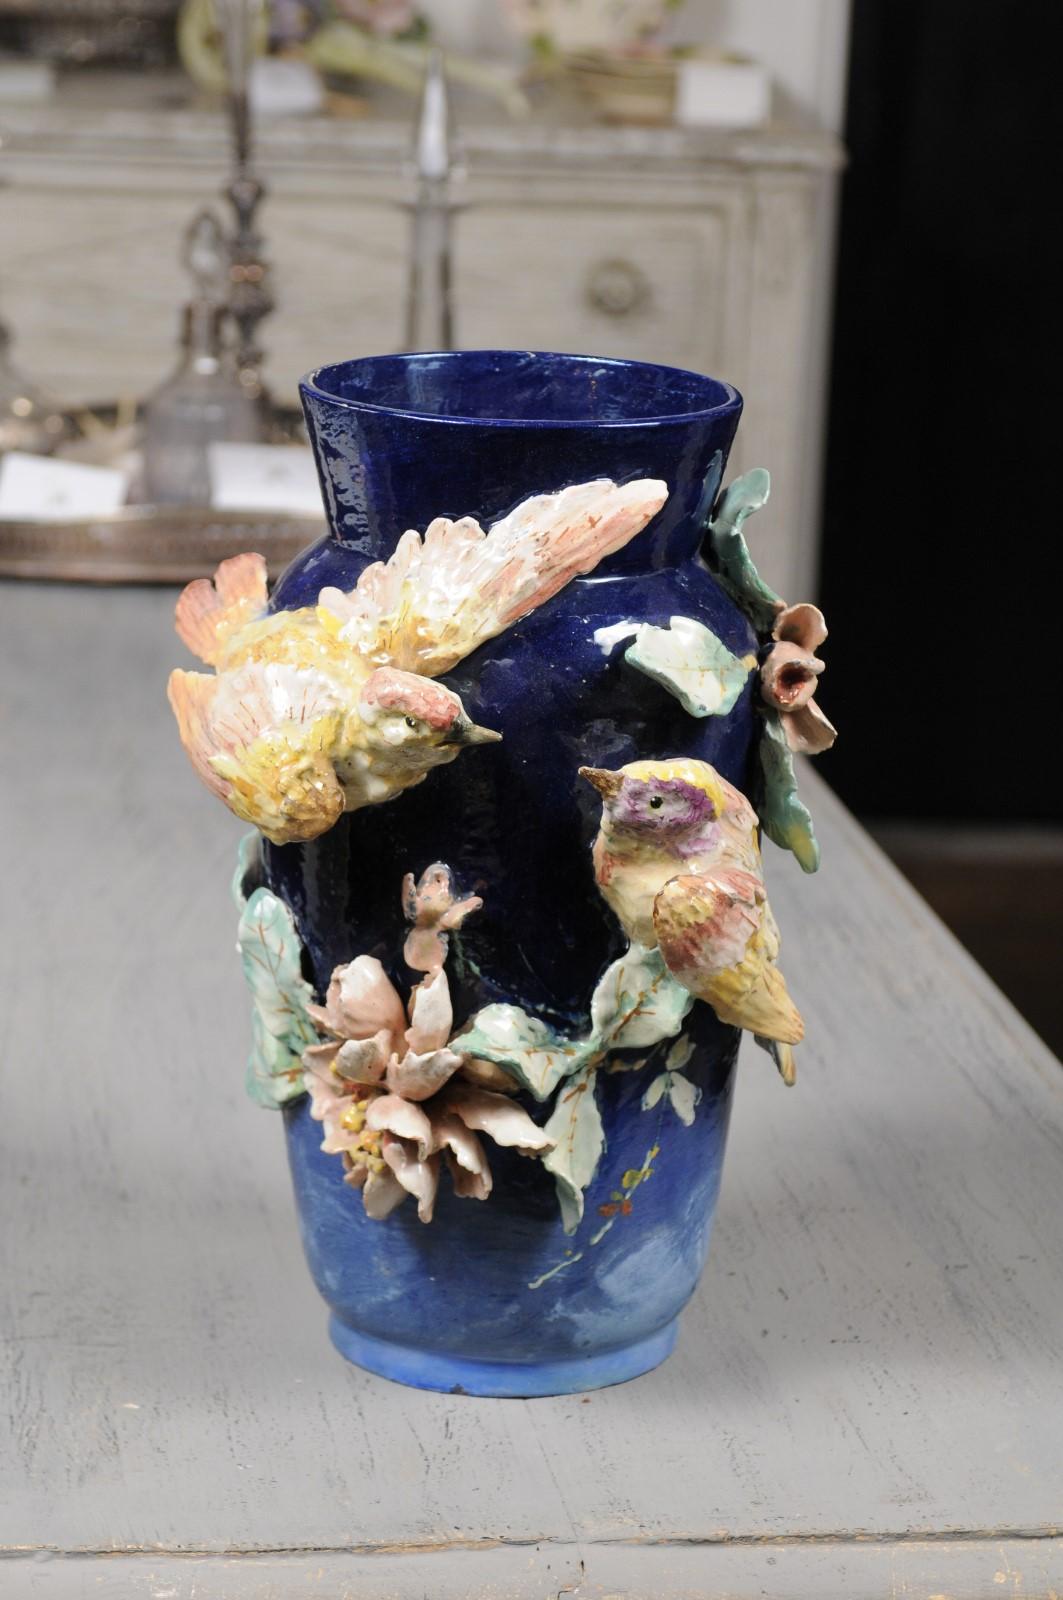 A French Ecole d'Auteuil Impressionist majolica vase from the late 19th century, with barbotine décor of birds and flowers. Created in the later years of the 19th century by a group of Impressionist ceramists located in the 16th arrondissement of